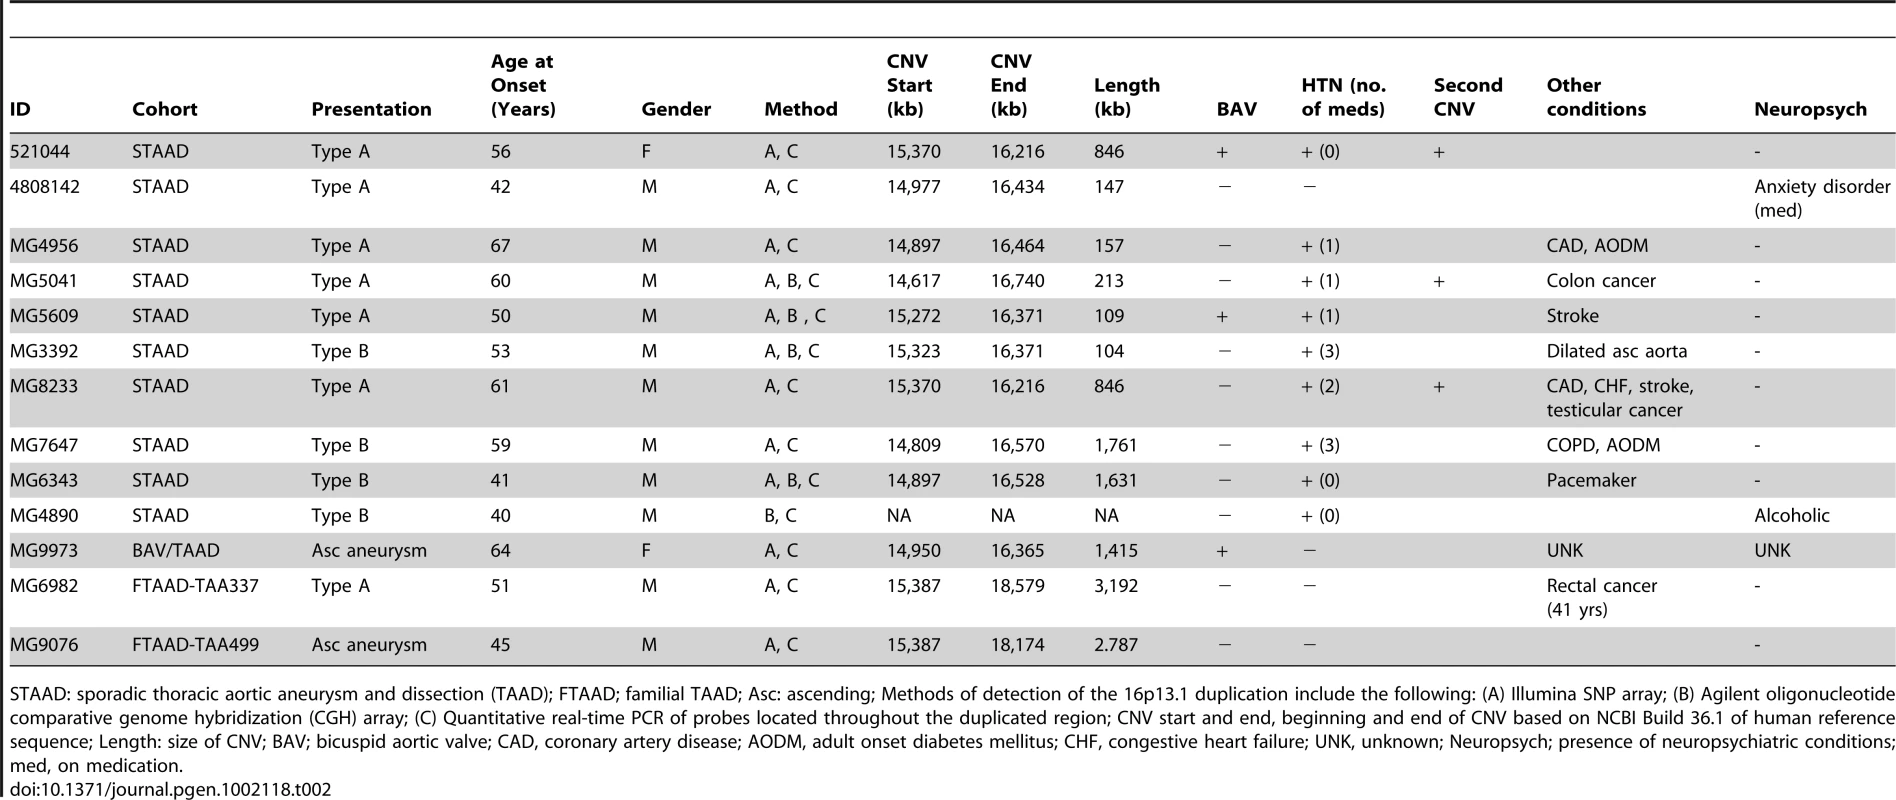 Clinical characteristics of patients with 16p13.1 duplications.